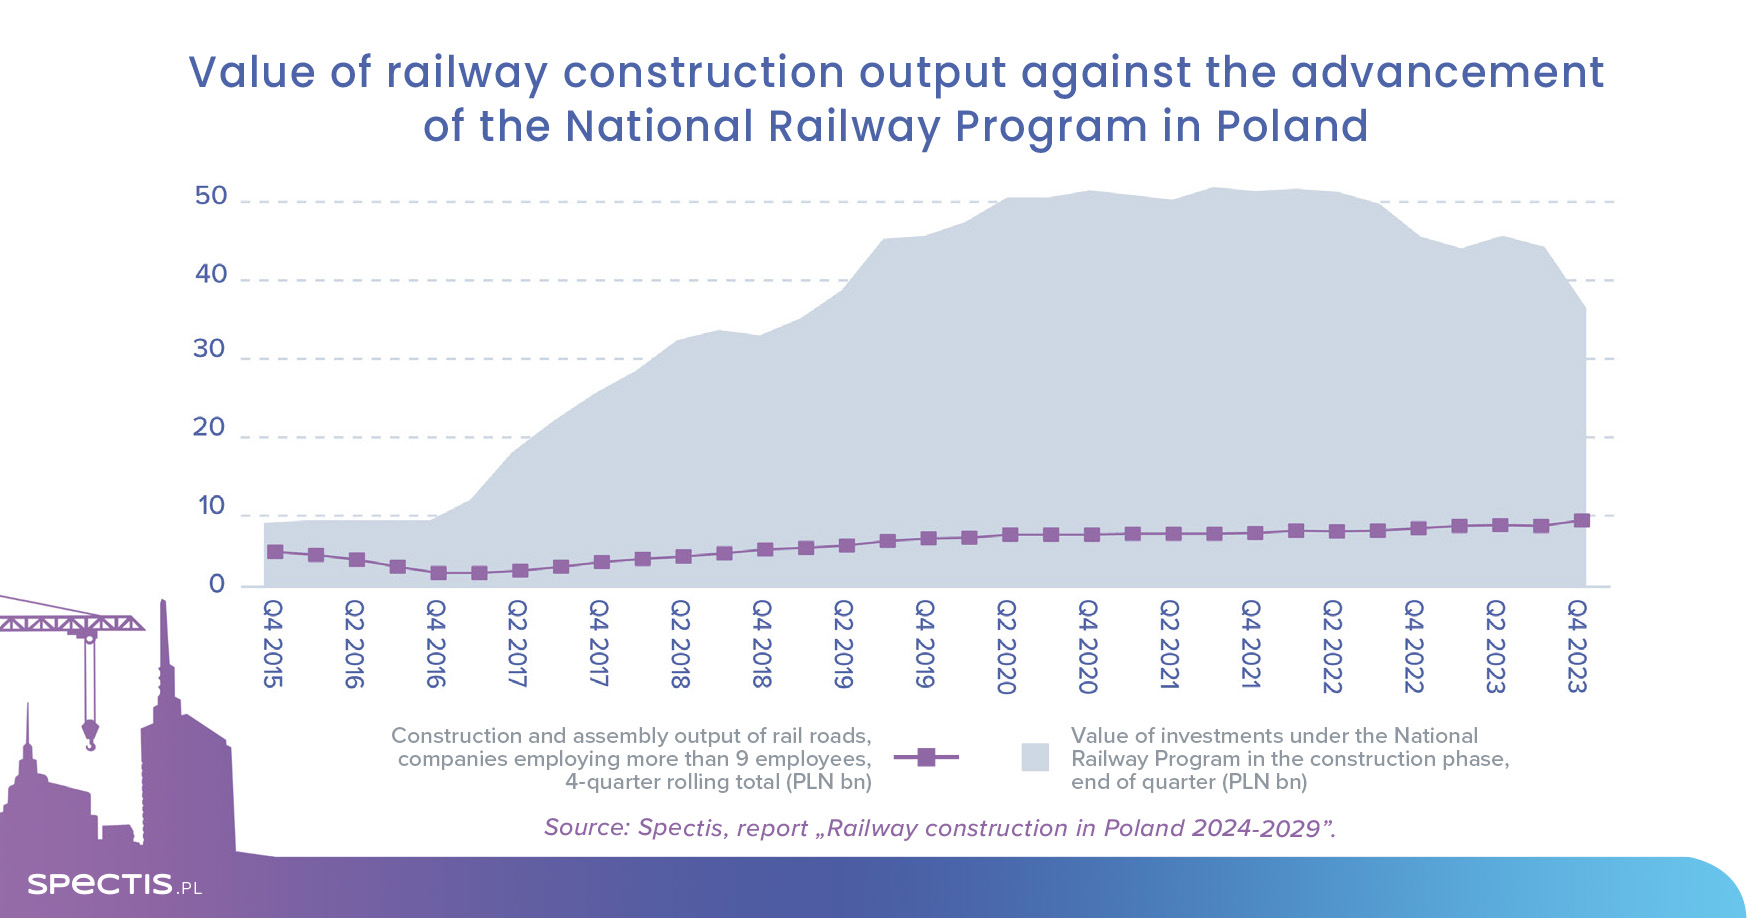 Contractors’ limited construction capacity to block booming investments in the Polish railway sector?